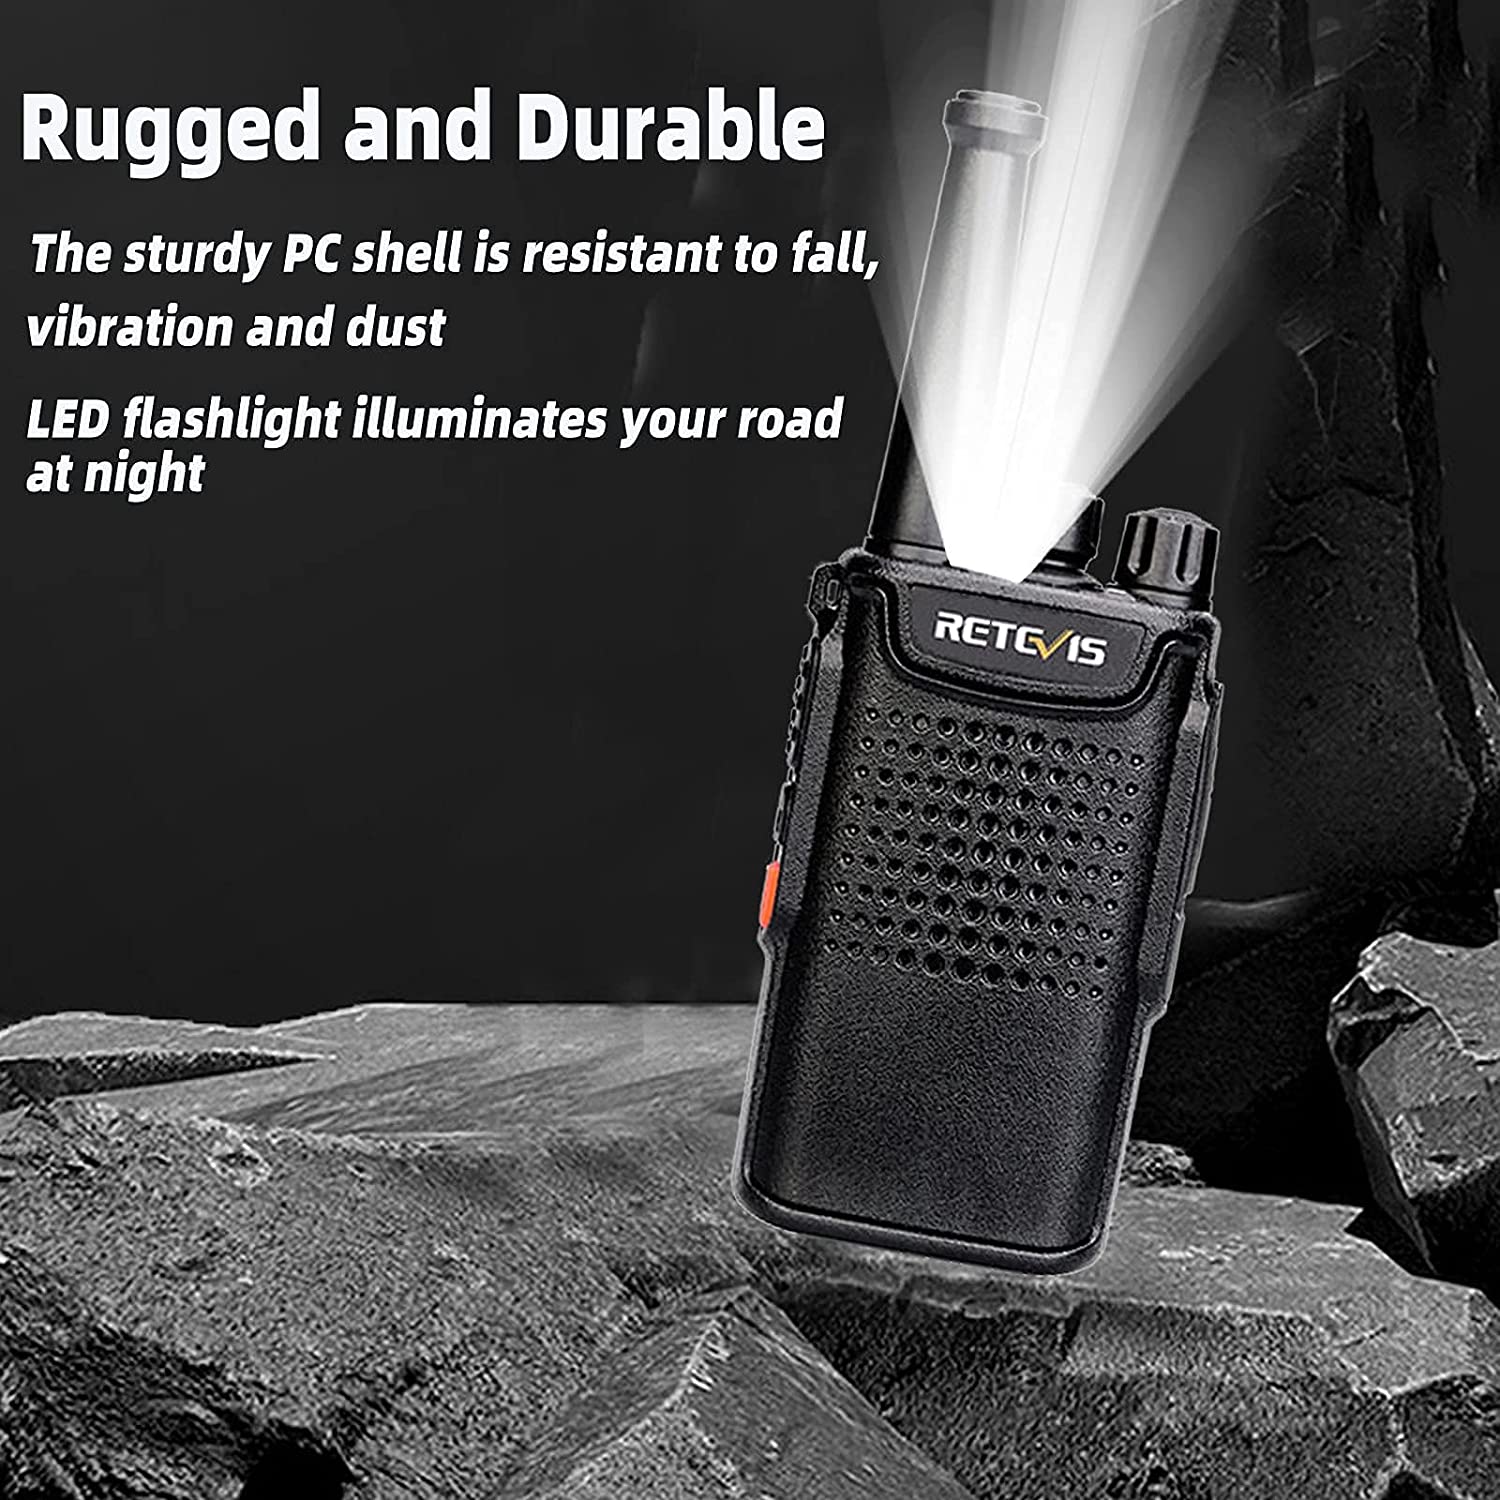 Retevis RT67 Walkie Talkie for Adults,Rechargeable Way Radios with  Earpiece(10 Pack)